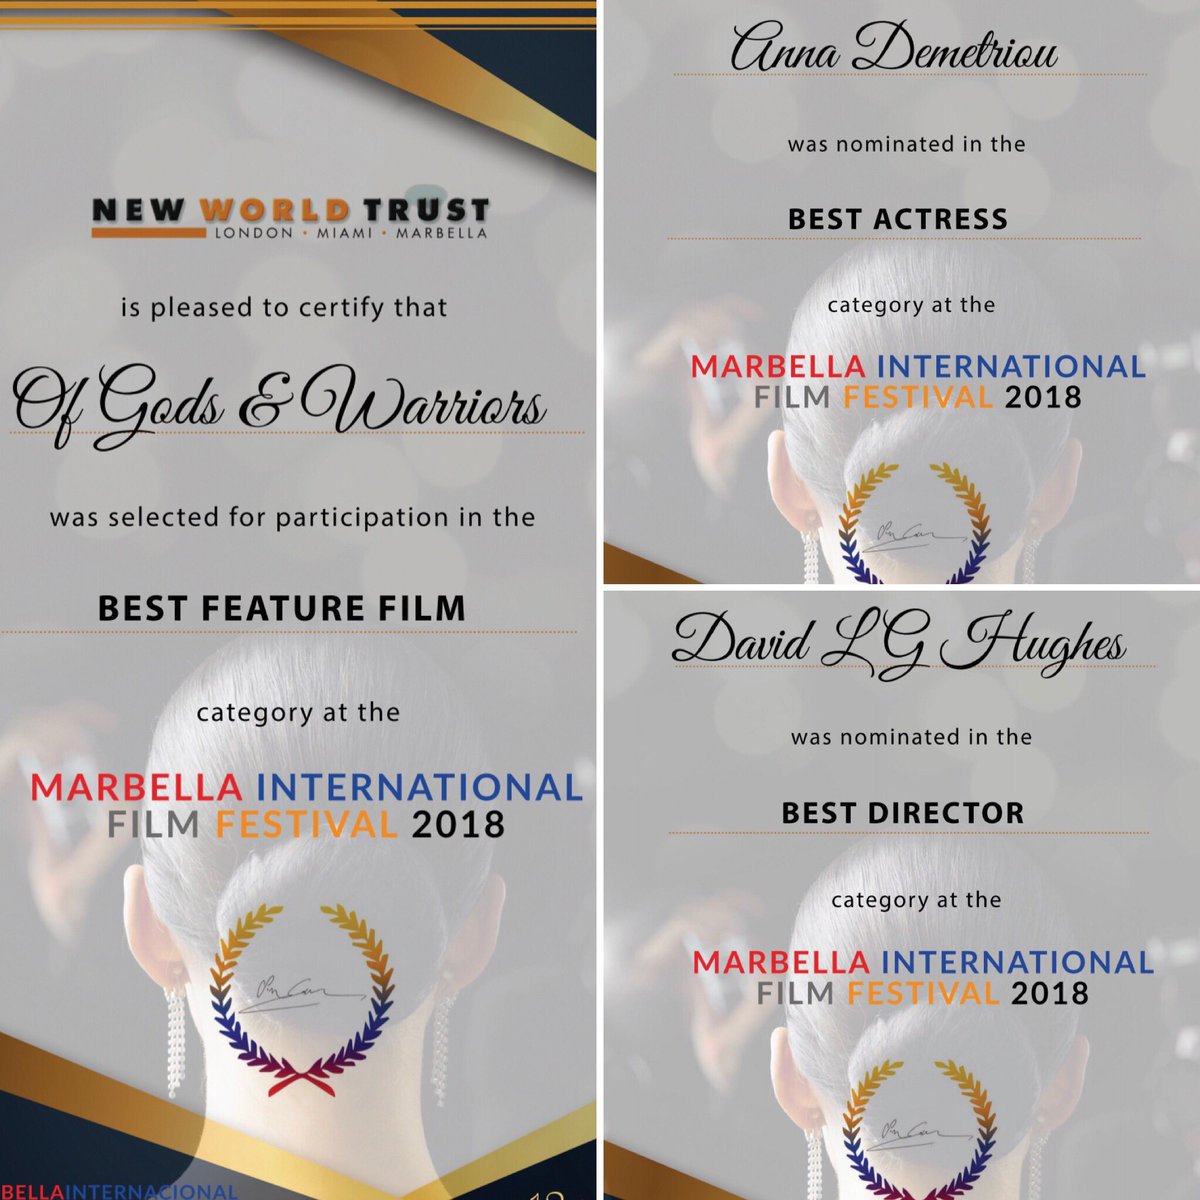 Thank you @MIFFLive for the nominations! BEST ACTRESS @Anna__Demetriou BEST DIRECTOR @davidlghughes and @ofGods_Warriors in the category for BEST FILM #seizeyourdestiny #VikingDestiny